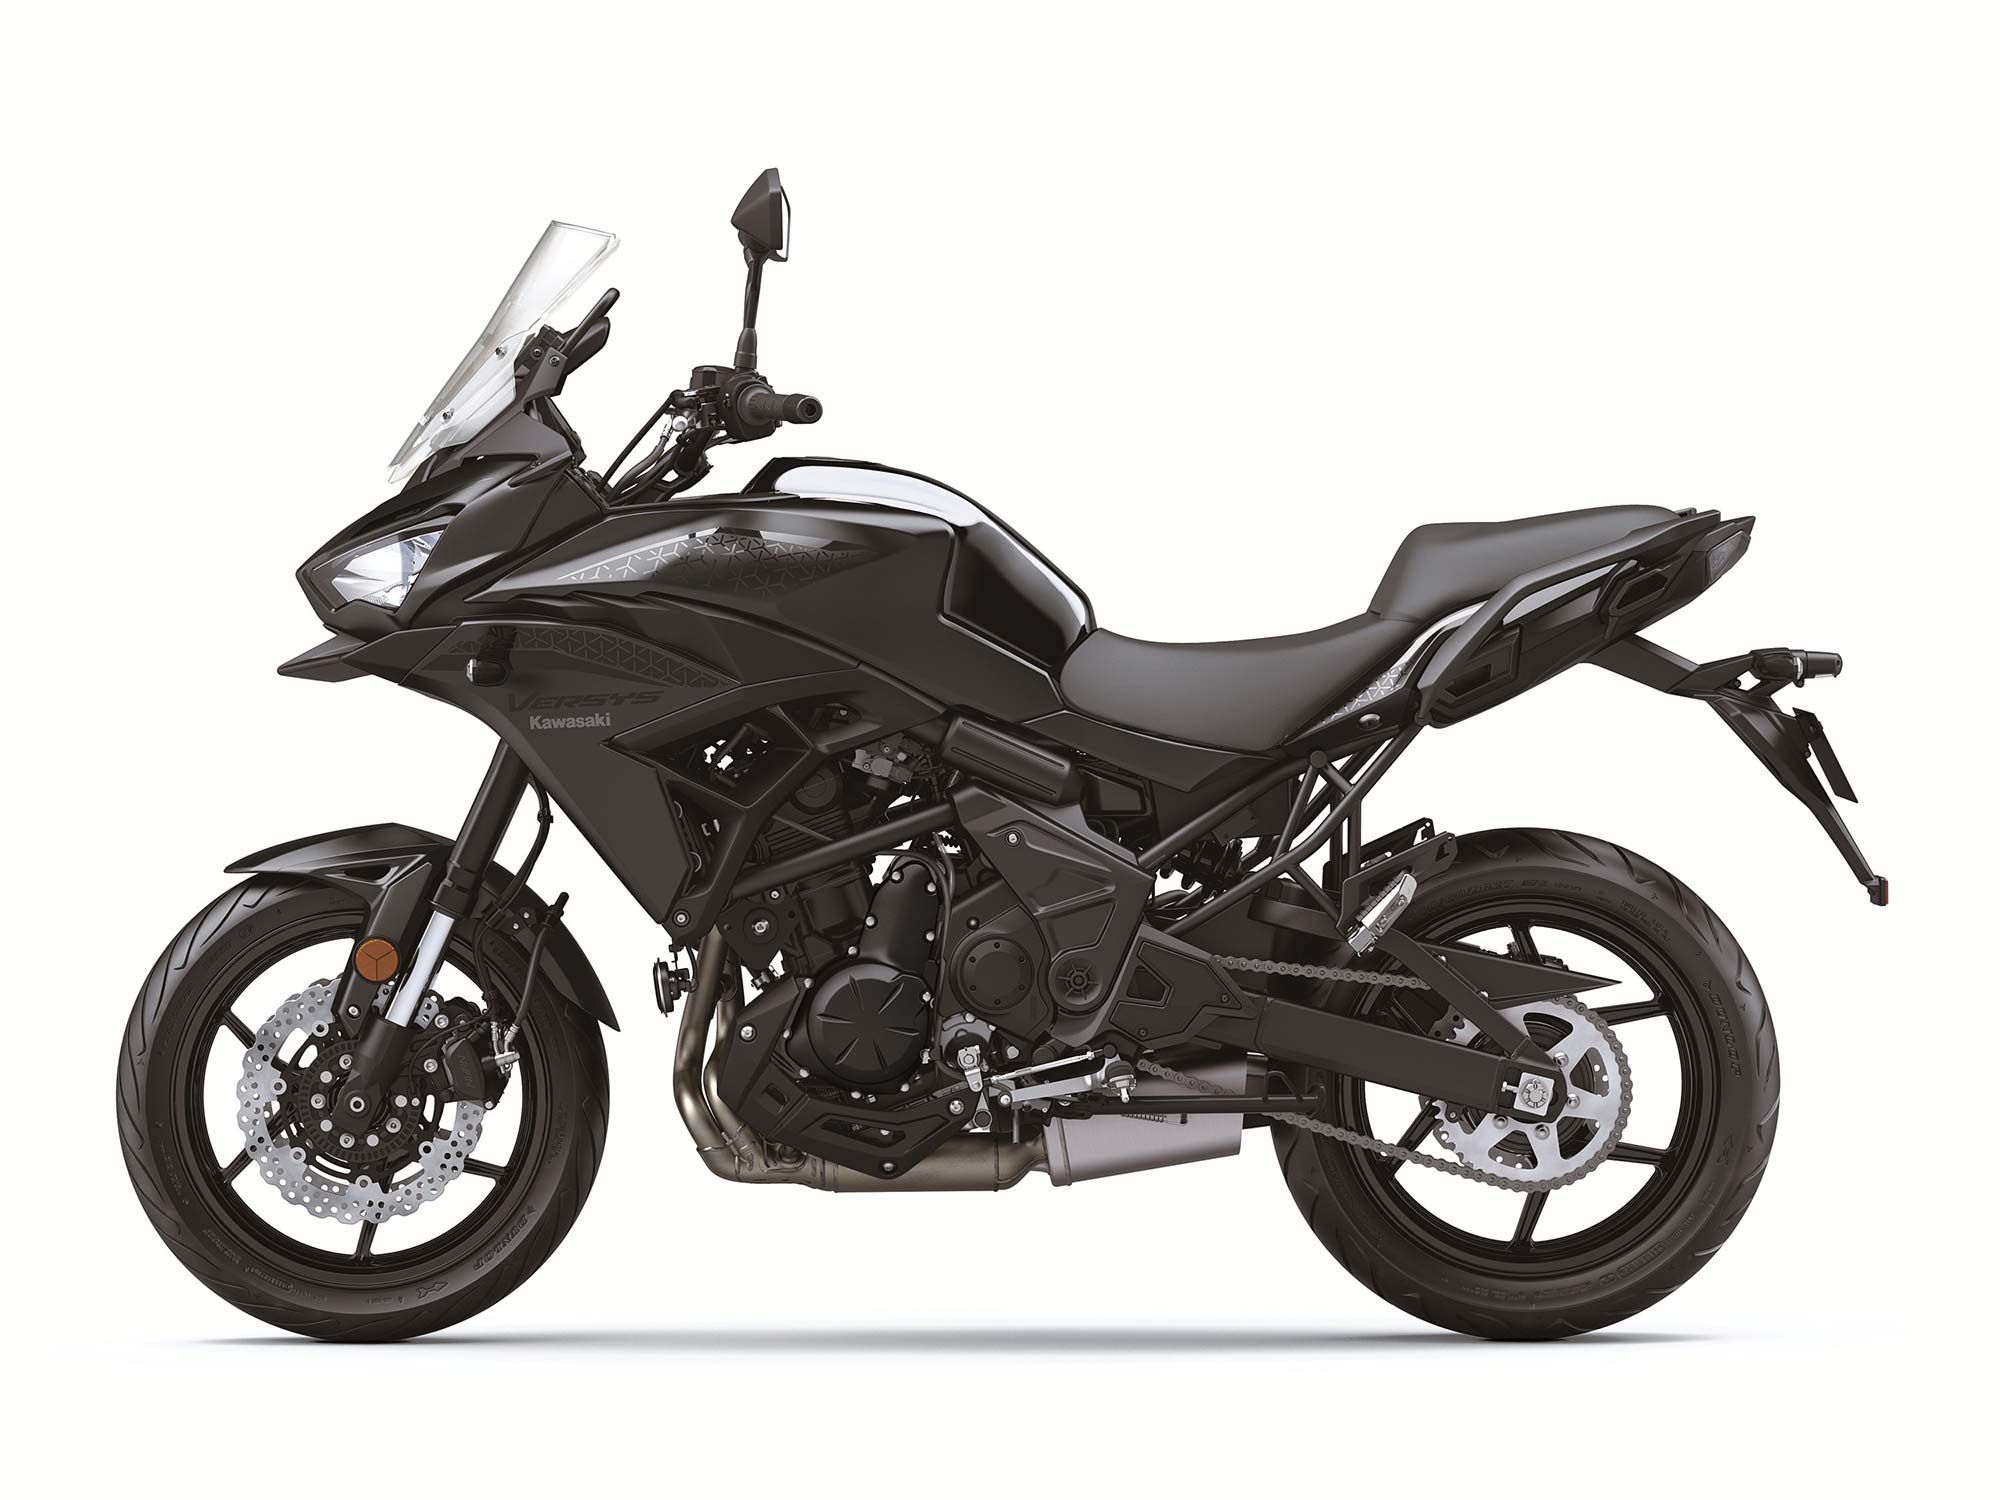 The Versys’ compact 649cc parallel twin has a linear power curve leading up to its peak 60 hp.